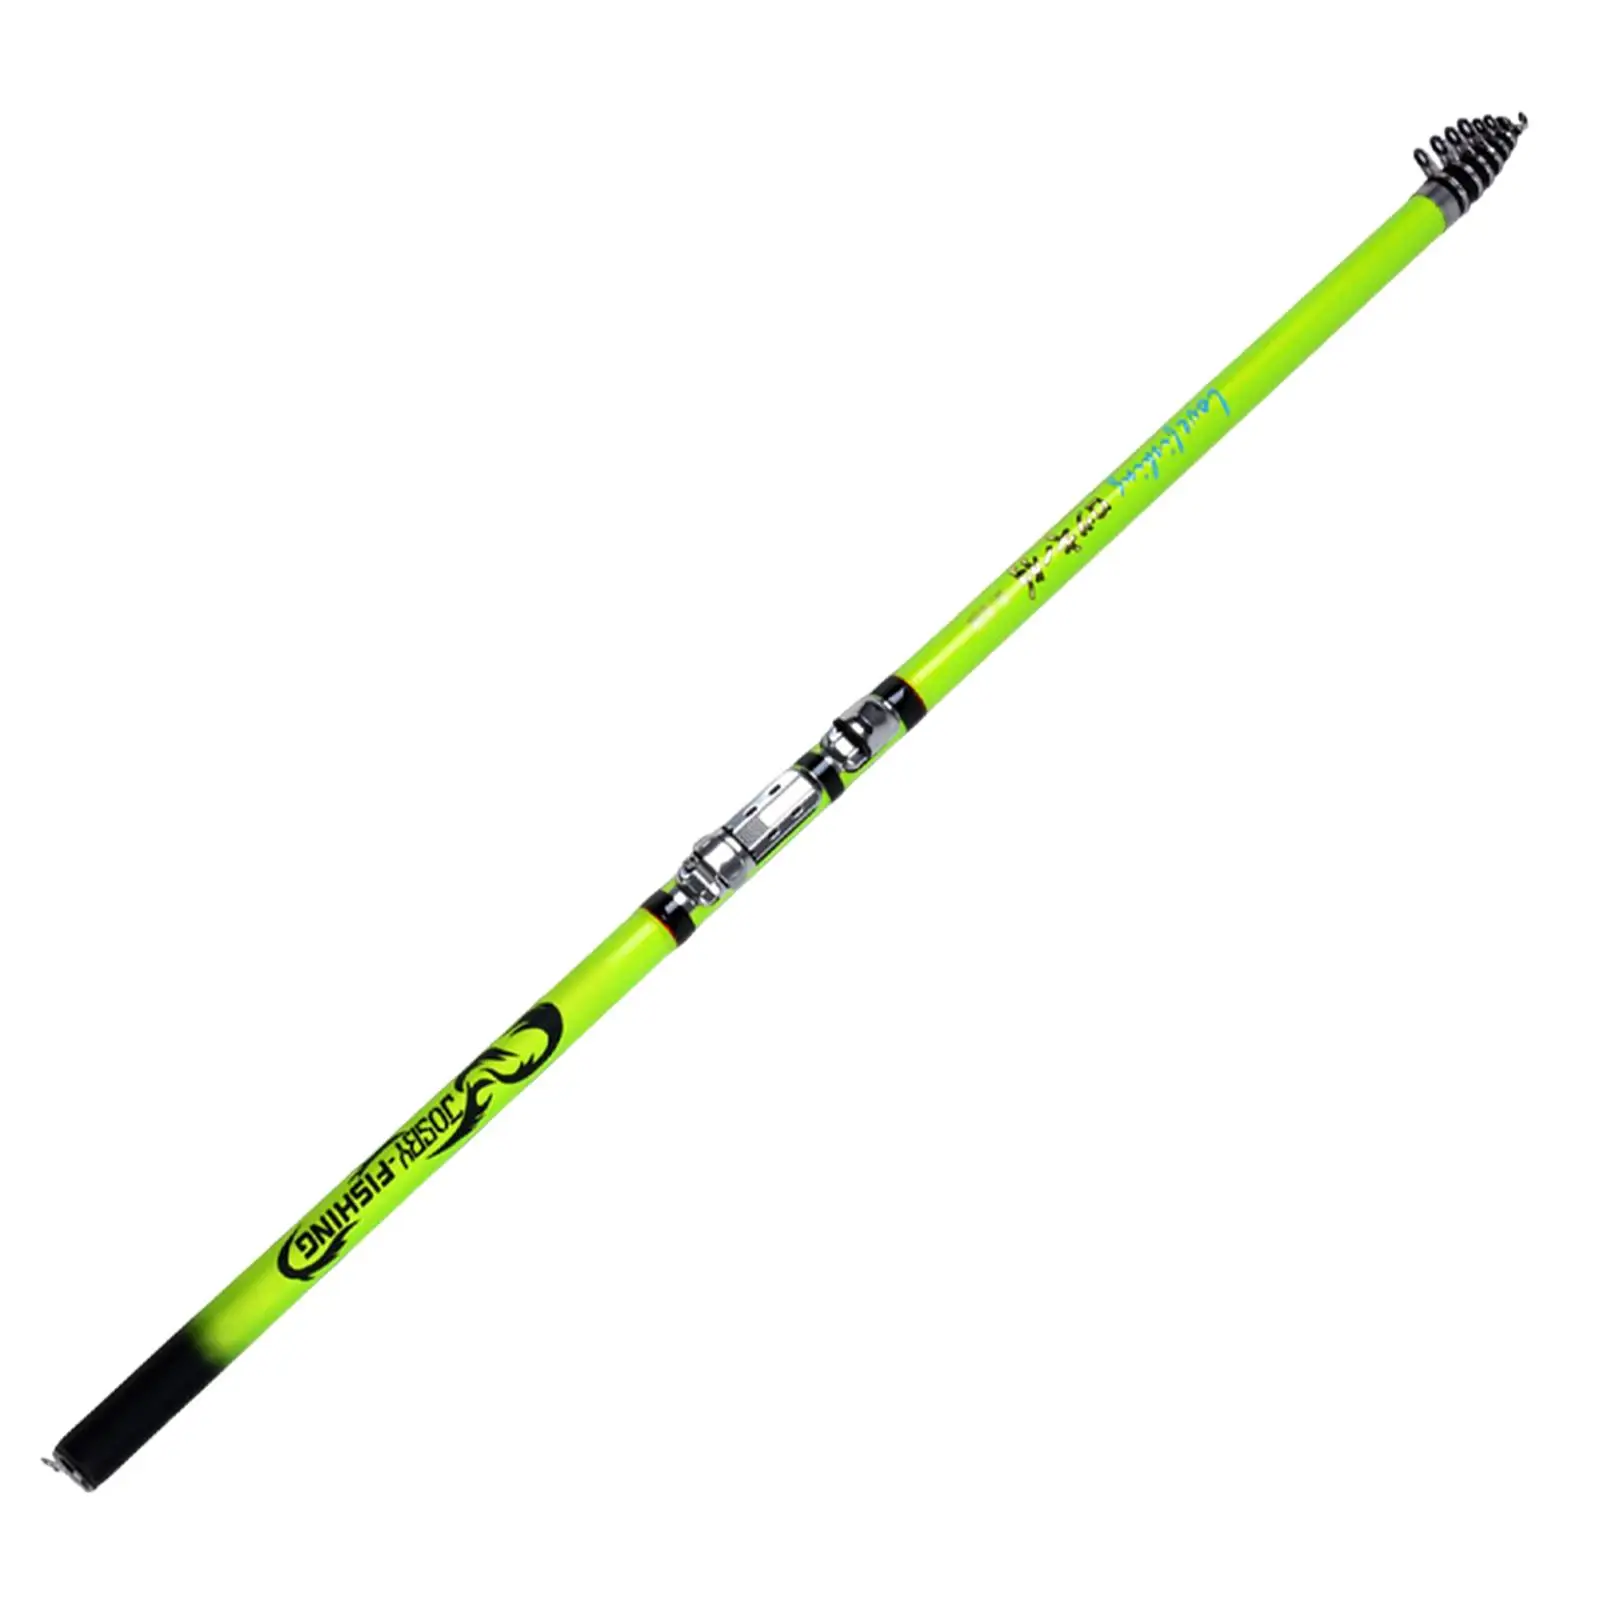 Telescopic Fishing Rod Collapsible Rod for Fishing on Trips and Vacations